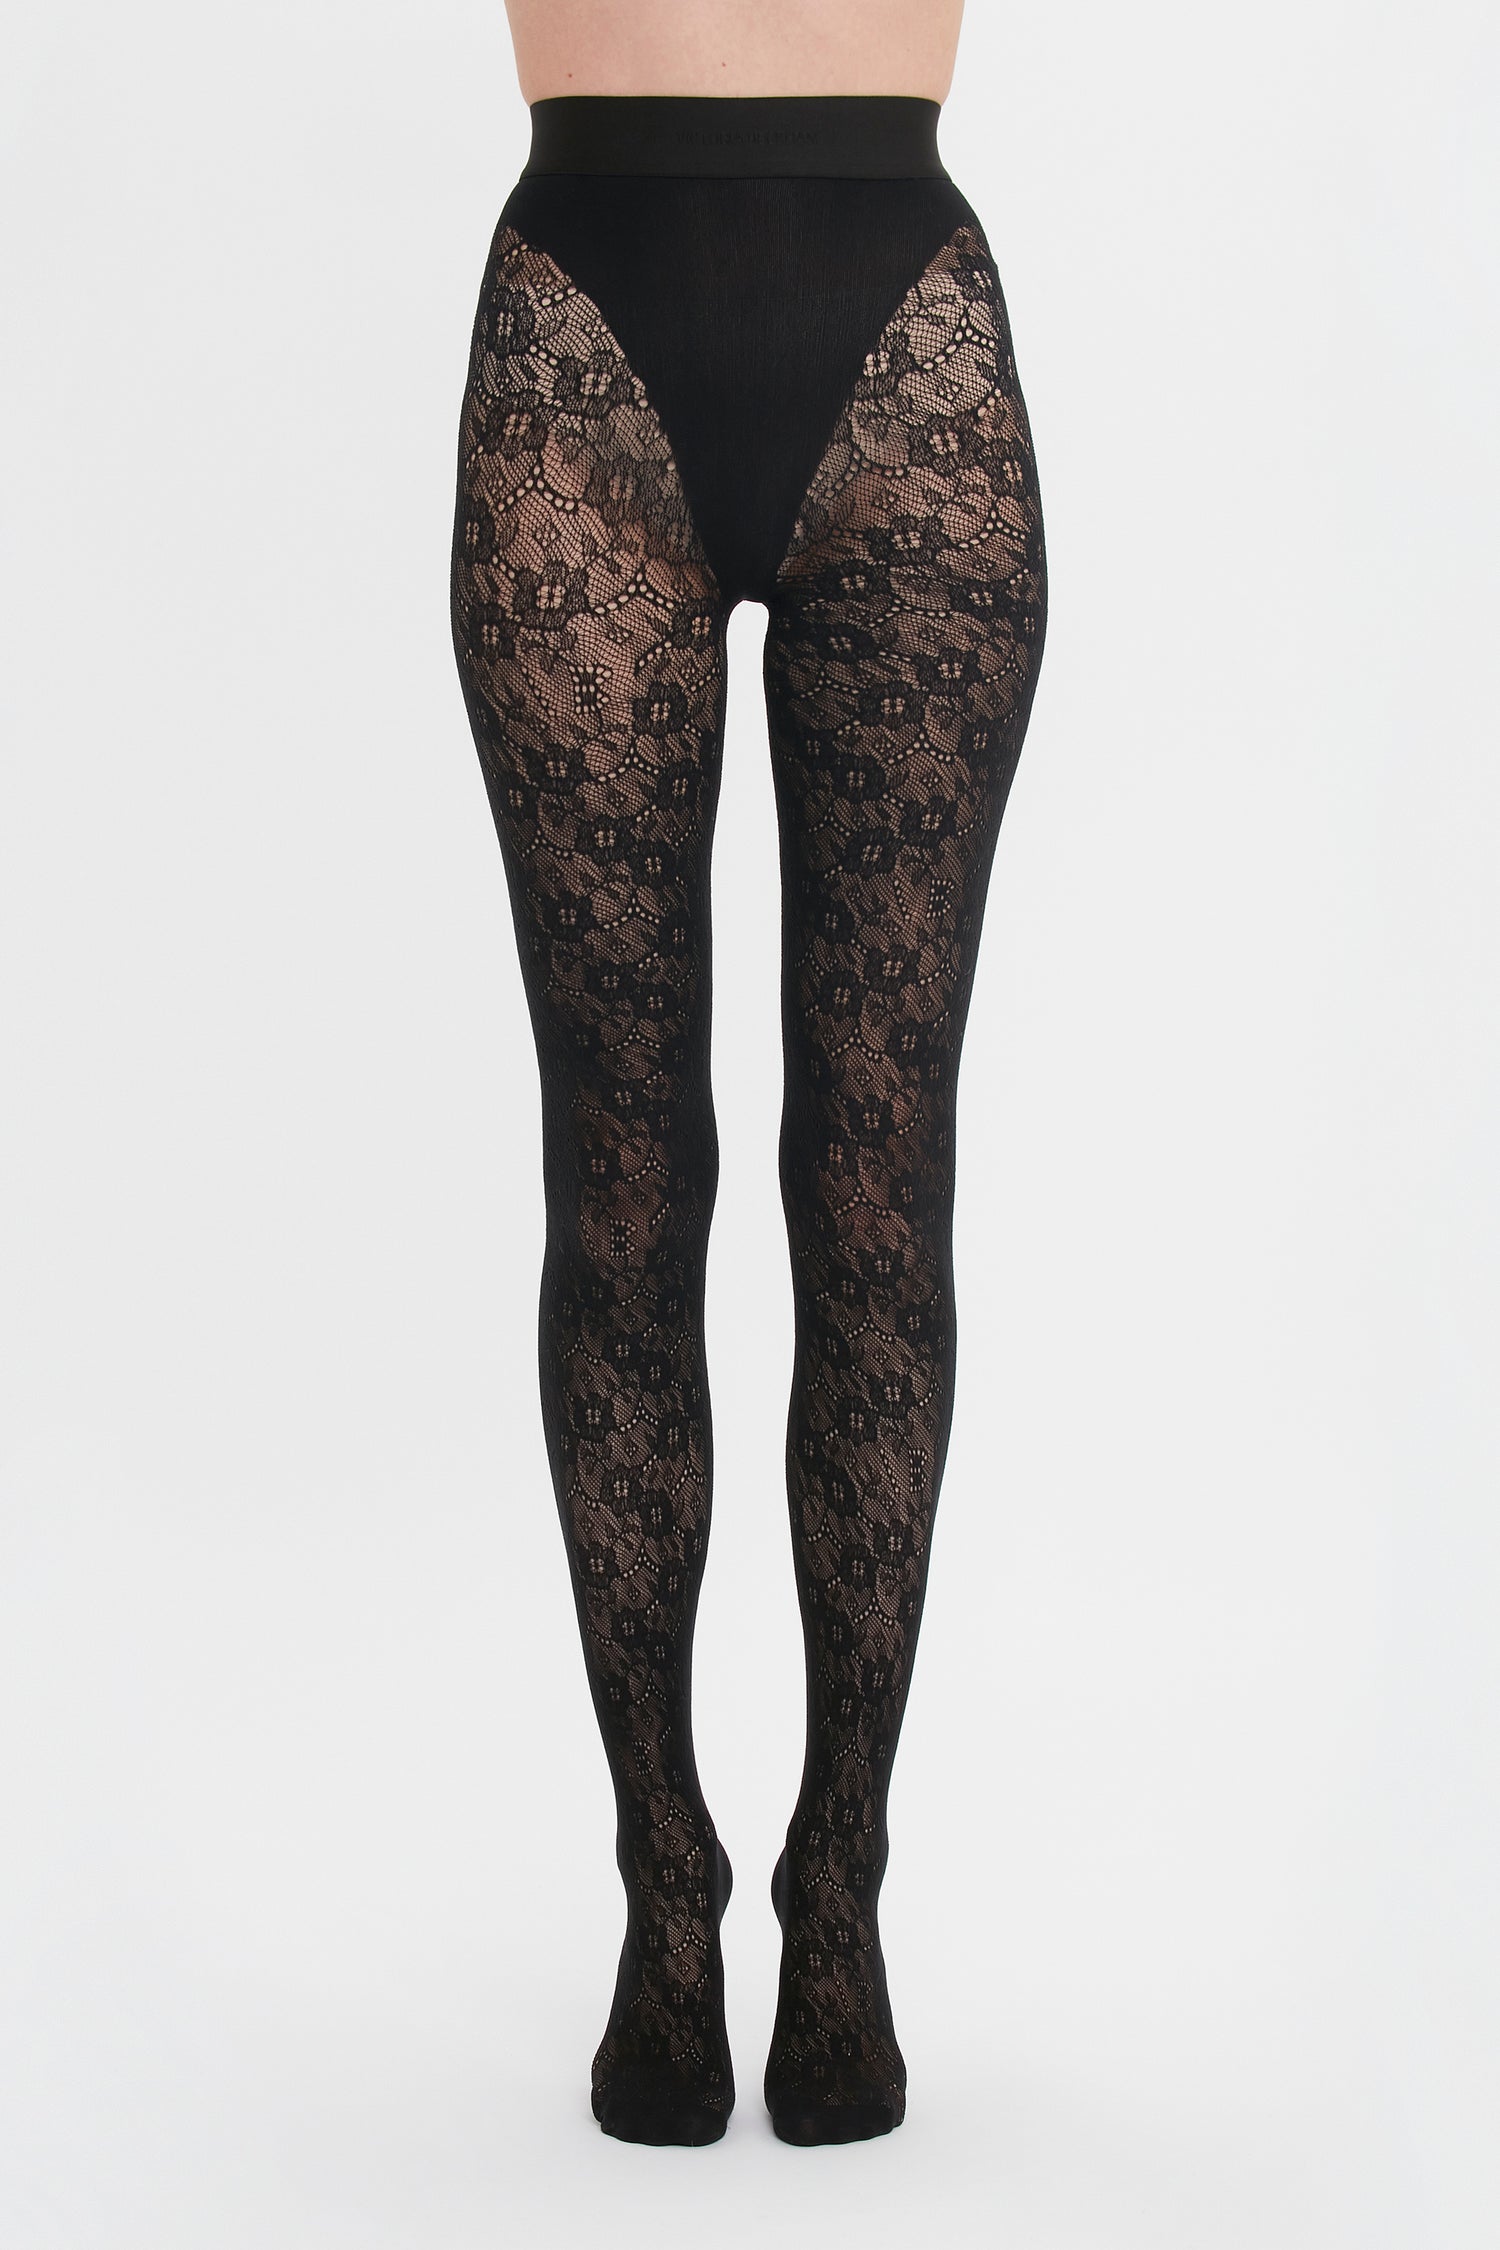 A person wearing ornate Victoria Beckham Exclusive VB Monogram Lace Tights in Black against a white background.